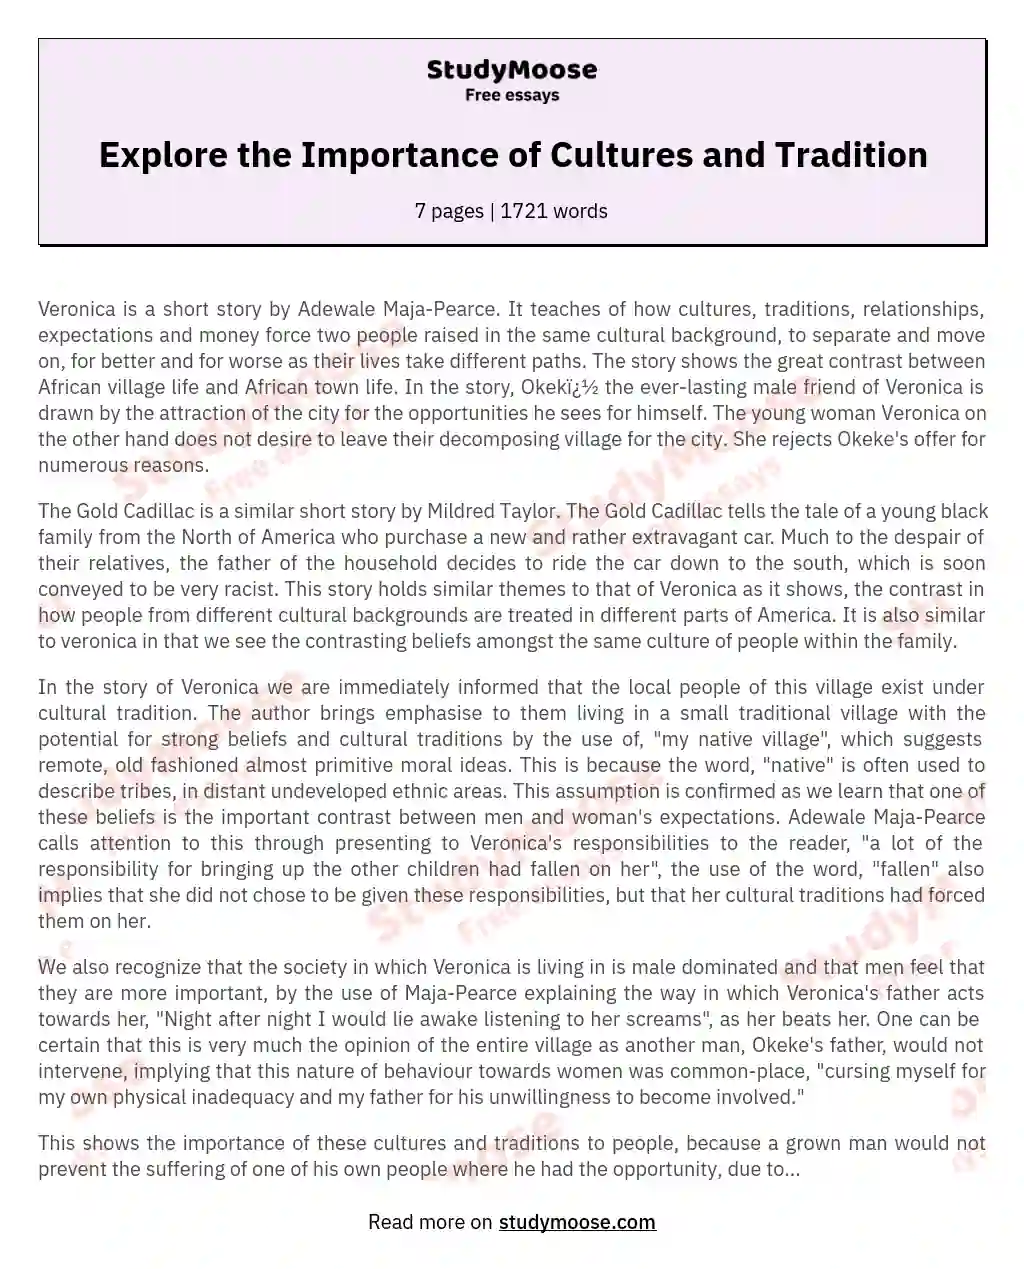 importance of culture essay brainly